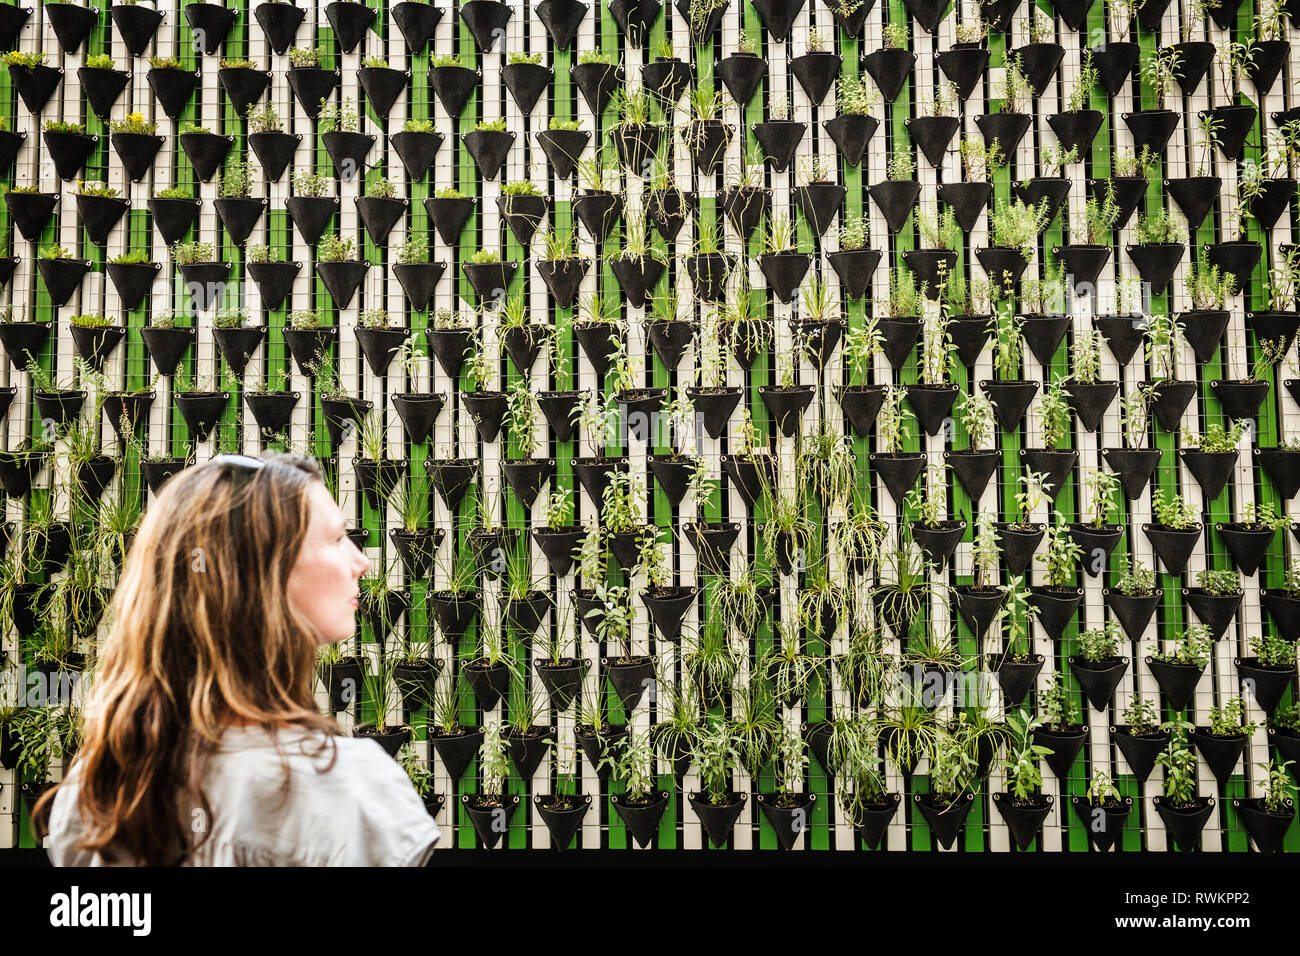 Mature woman in front of potted plant wall, over shoulder view,  Prague, Czech Republic Stock Photo